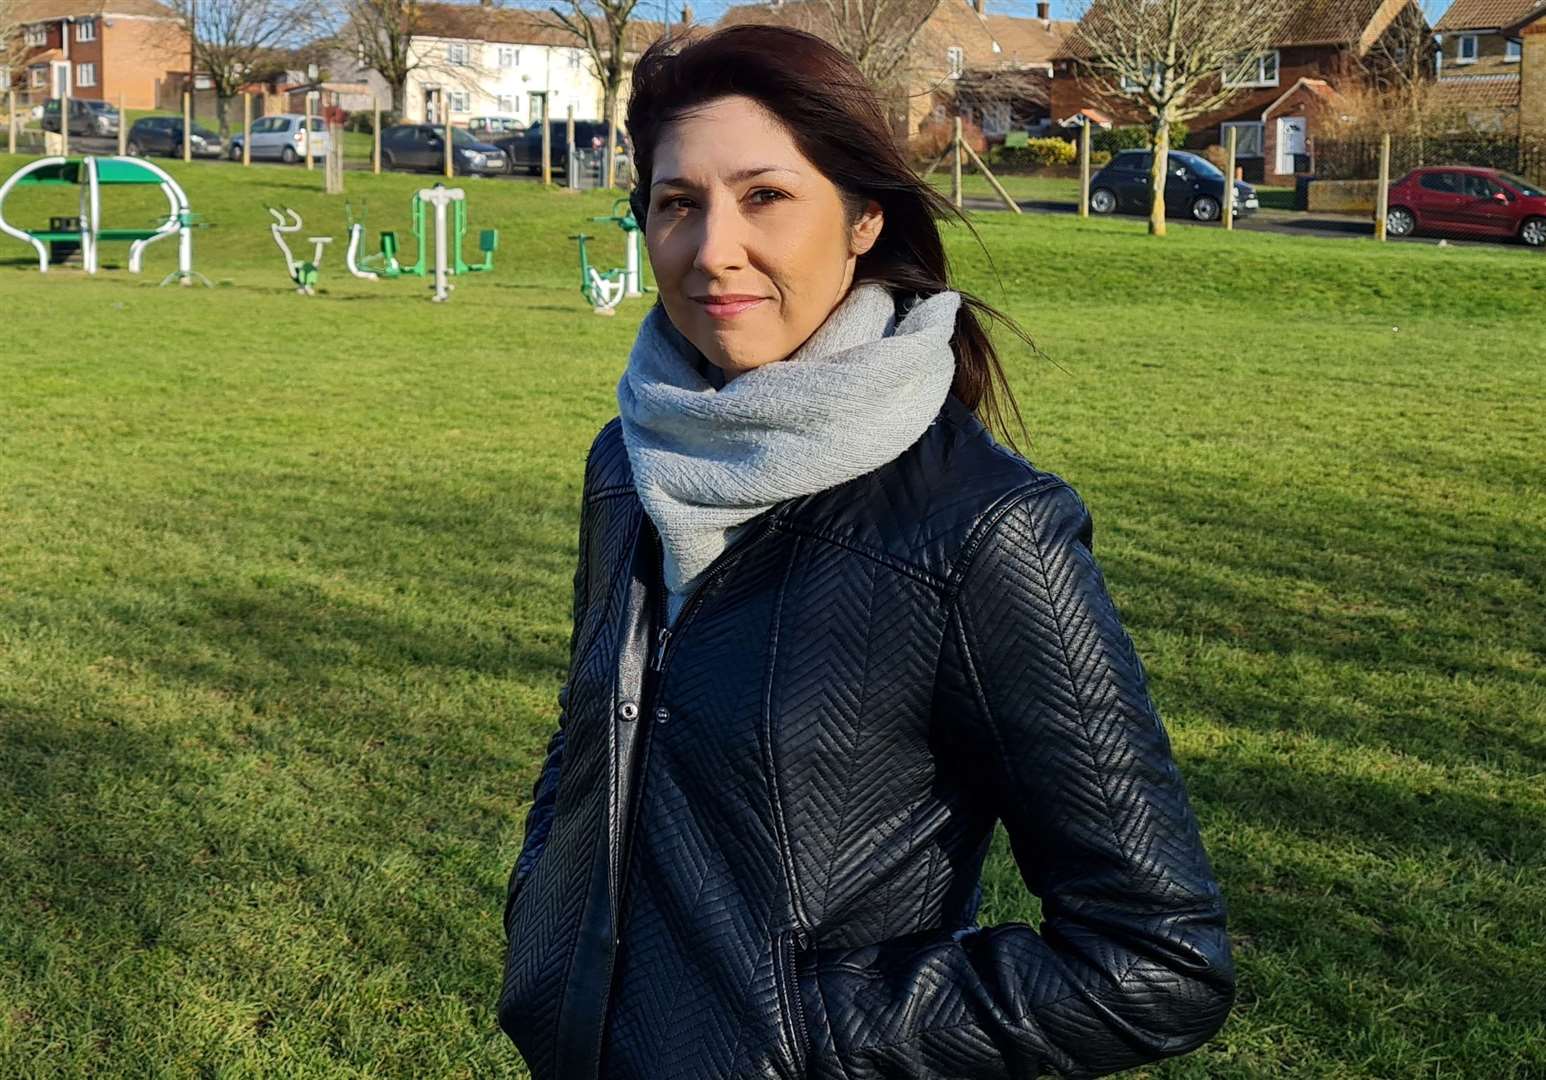 Louise Harvey-Quirke was Sturry councillor up until losing her seat in the local elections